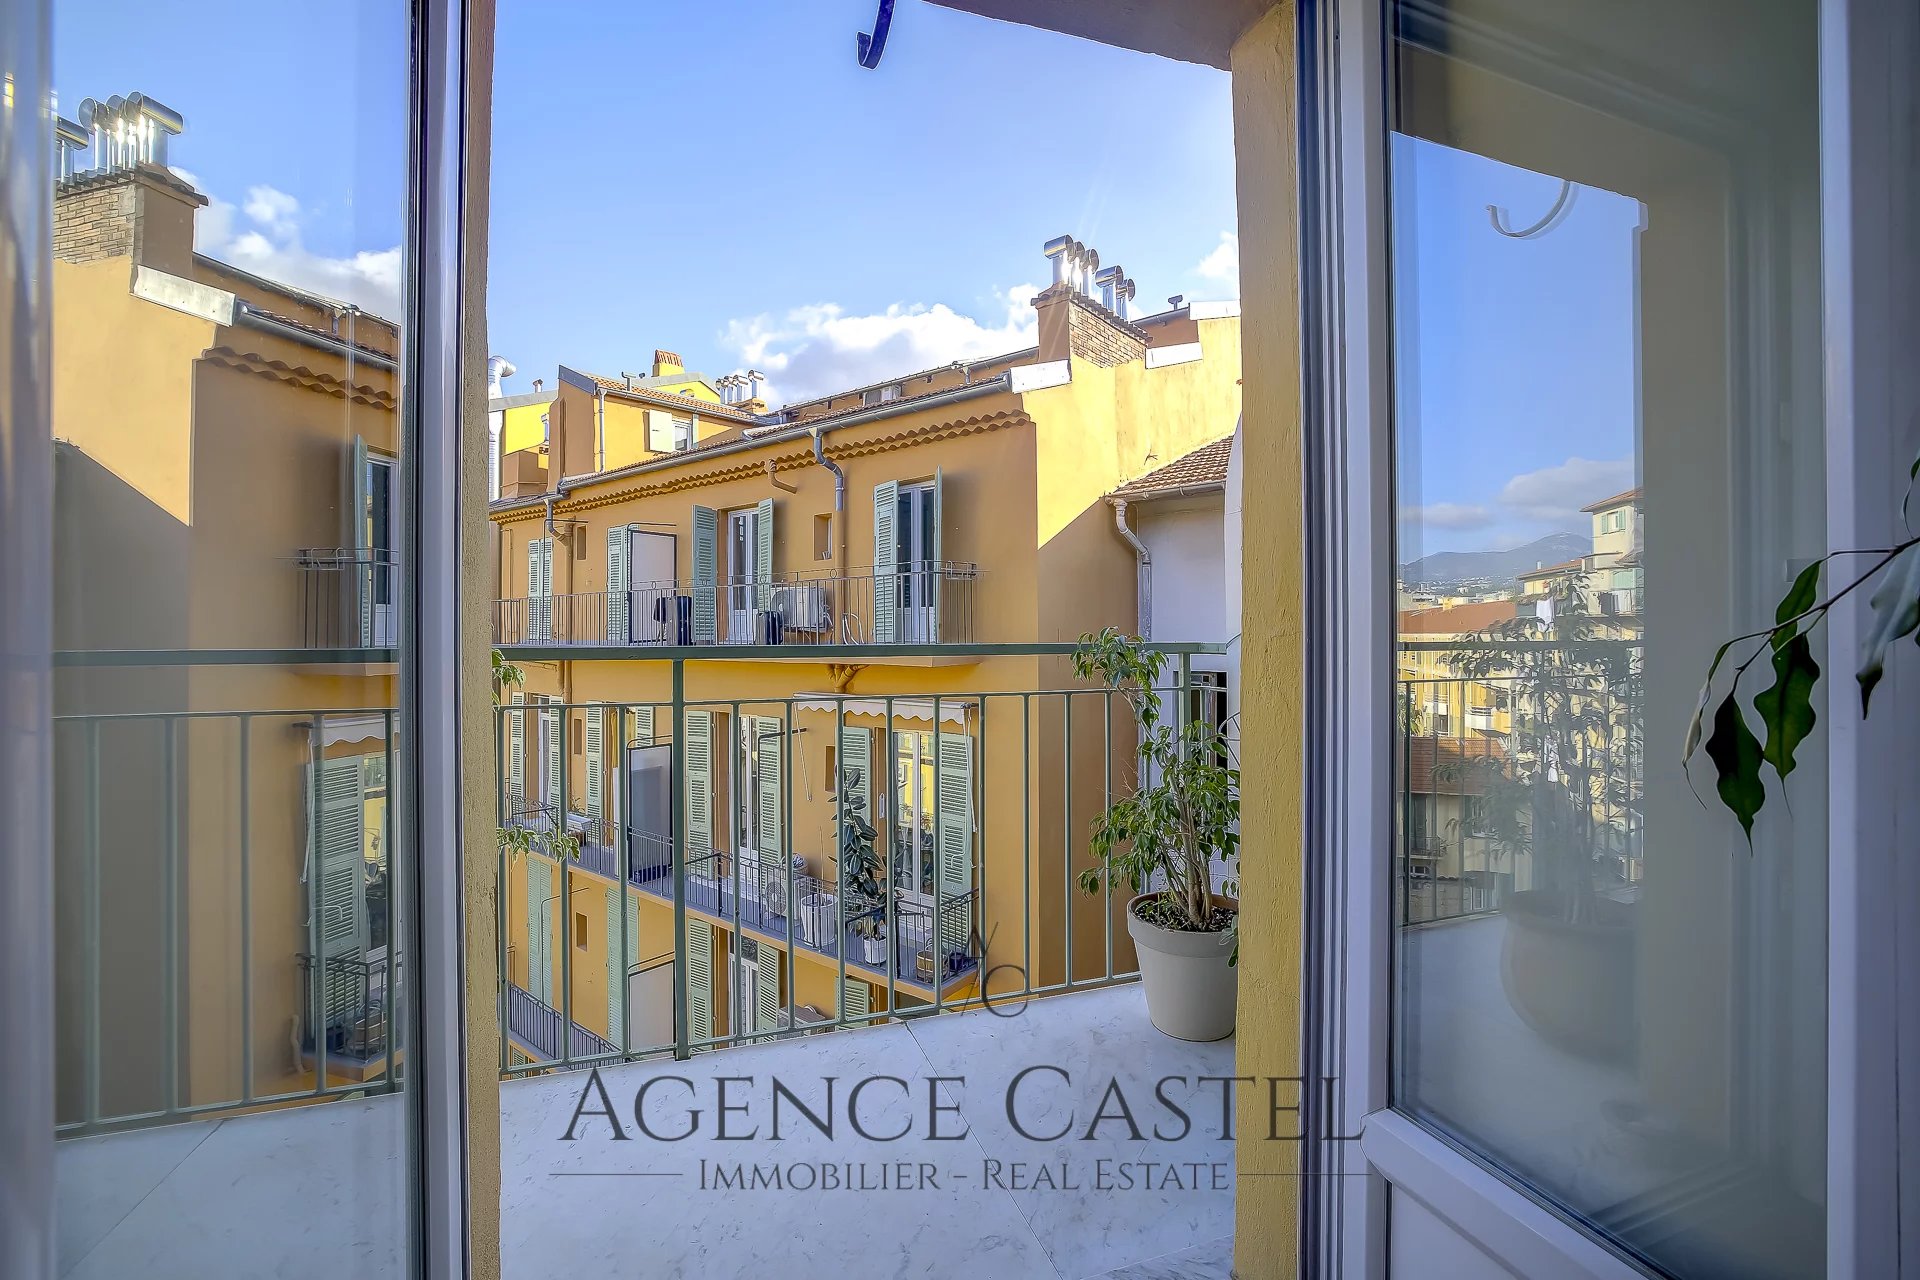 NICE PORT AREA - CHARMING ONE BEDROOM APARTMENT WITH BALCONY